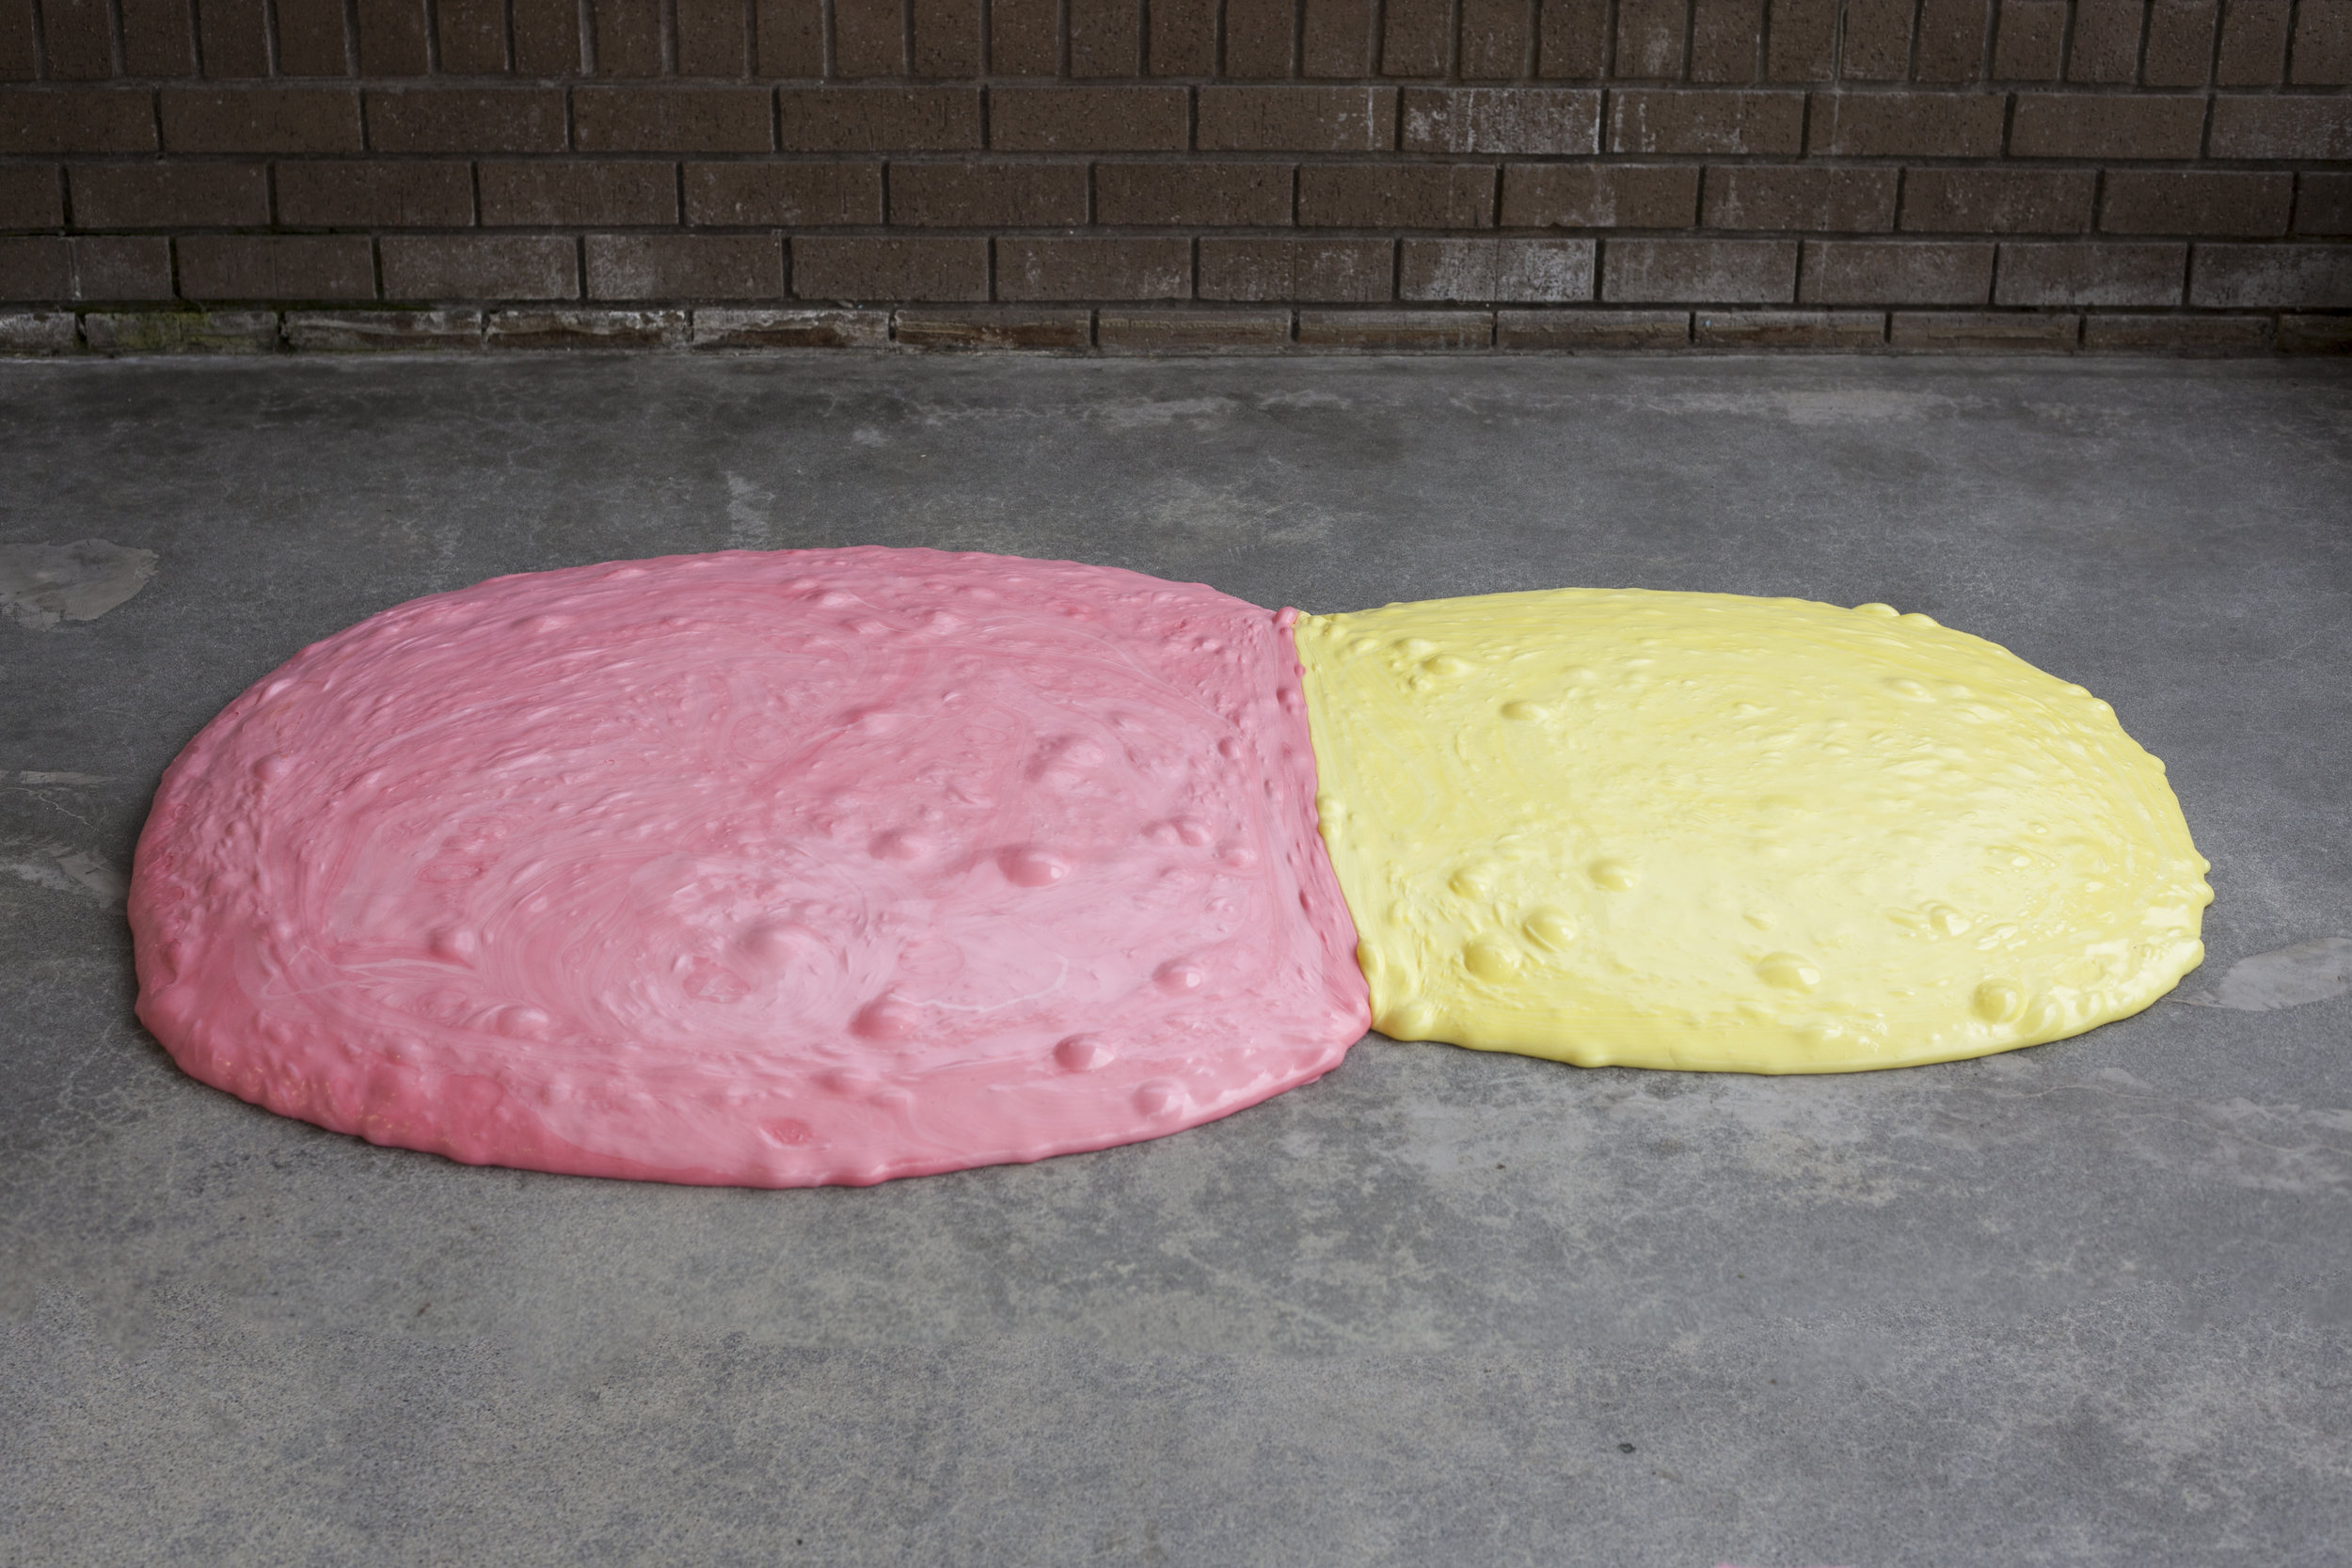   80 pounds cherry-vanilla taffy, and 40 pounds mango taffy 12" x 12" x 14" and 10" x 10" x 10" at start. Dimensions variable over time.   Installed at Prairie Underground, Seattle, WA.  